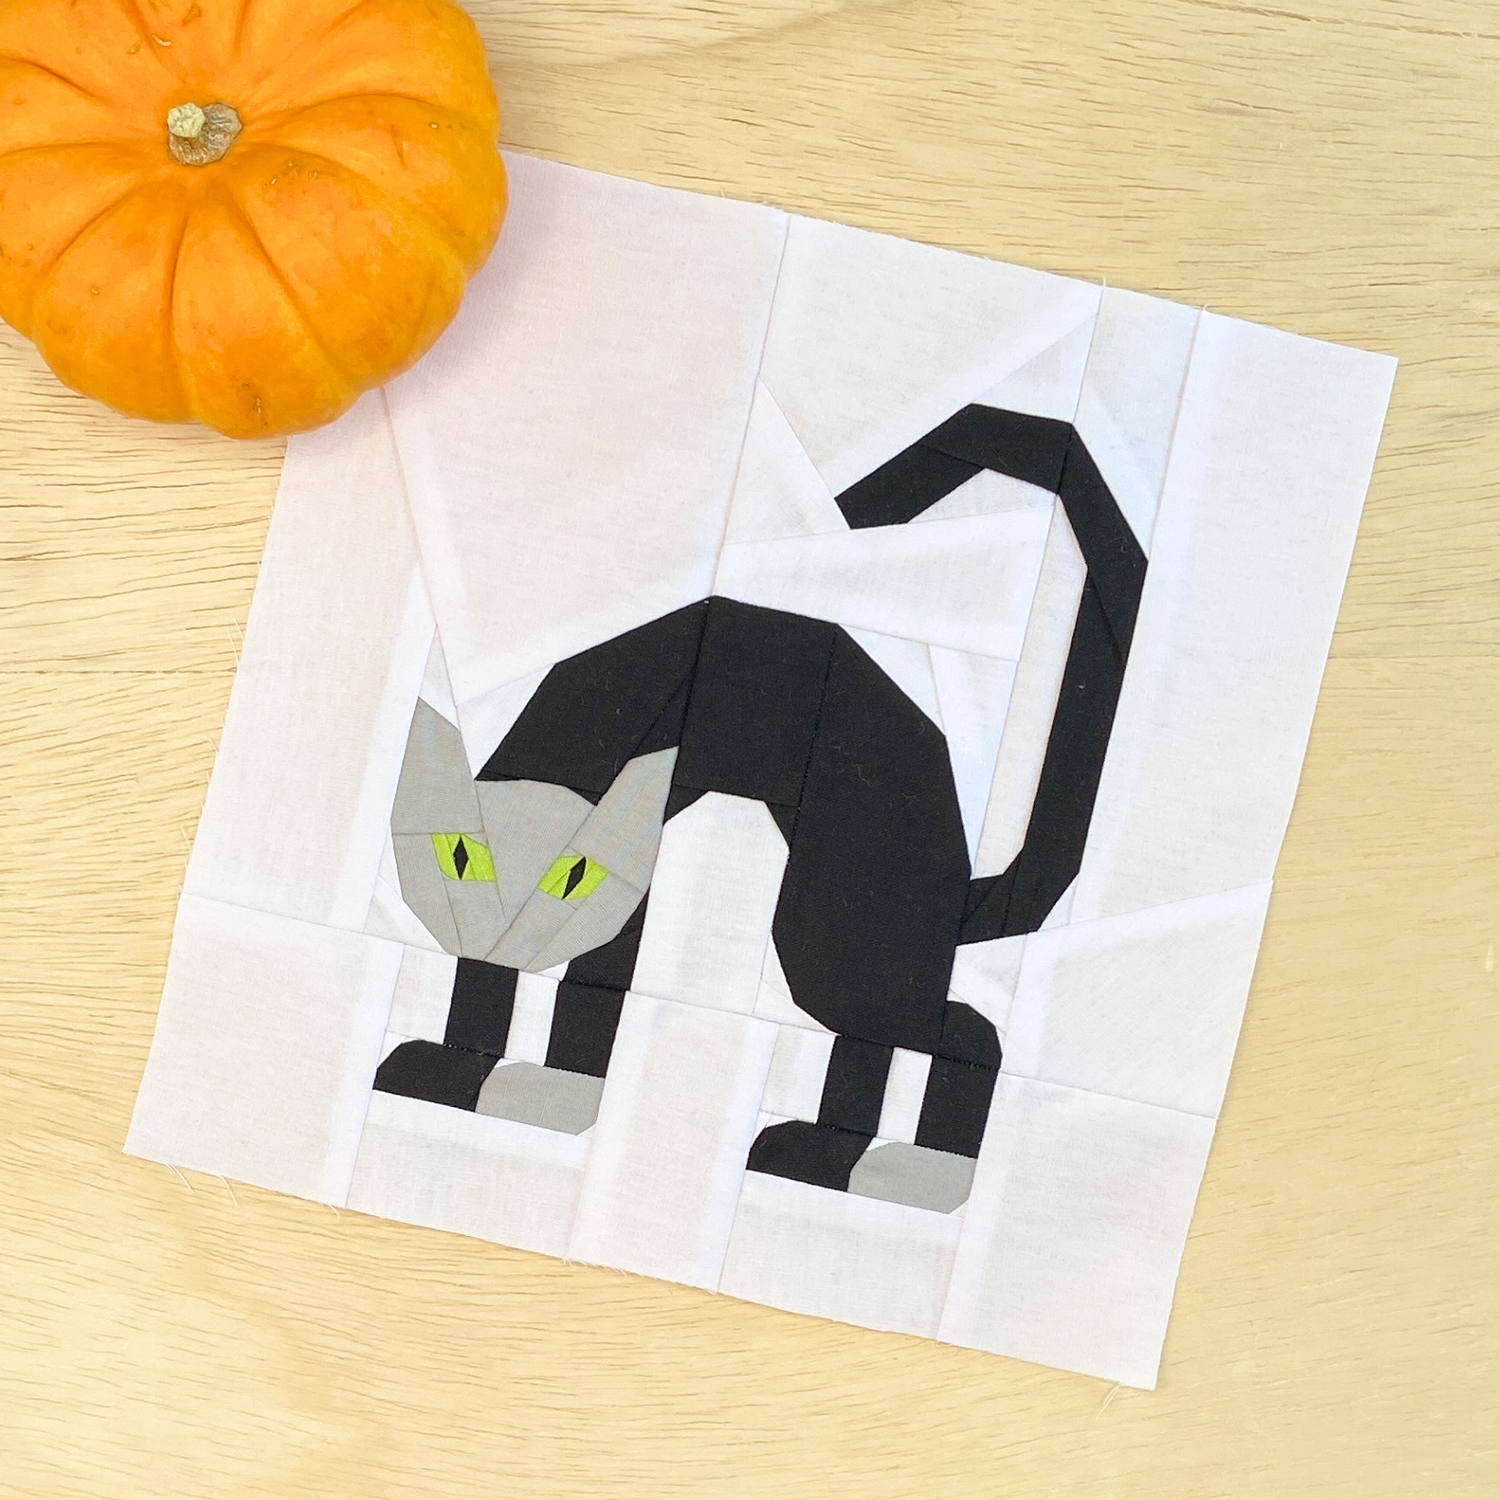 a black cat with arched back features in this cat quilt block